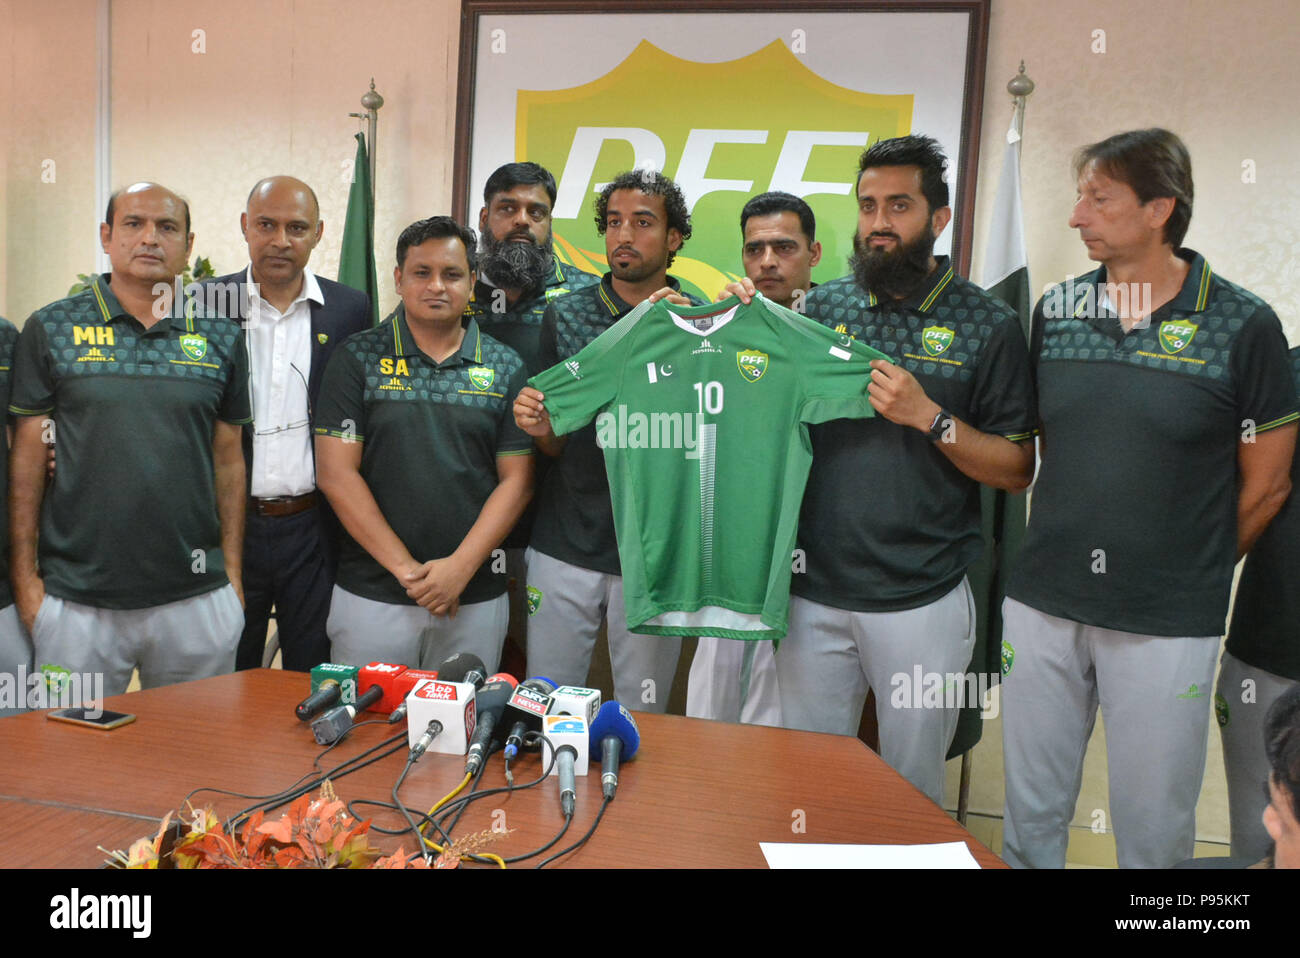 https://c8.alamy.com/comp/P95KKT/lahore-pakistan-15th-july-2018-pakistani-officials-brazilian-head-coach-jose-antonio-nogueira-coach-shahid-anwar-media-marketing-manager-shahid-khokhar-and-players-of-national-football-team-unveiling-the-kits-of-upcoming-event-during-a-press-conference-at-pakistan-football-federation-office-in-lahore-credit-rana-sajid-hussainpacific-pressalamy-live-news-P95KKT.jpg